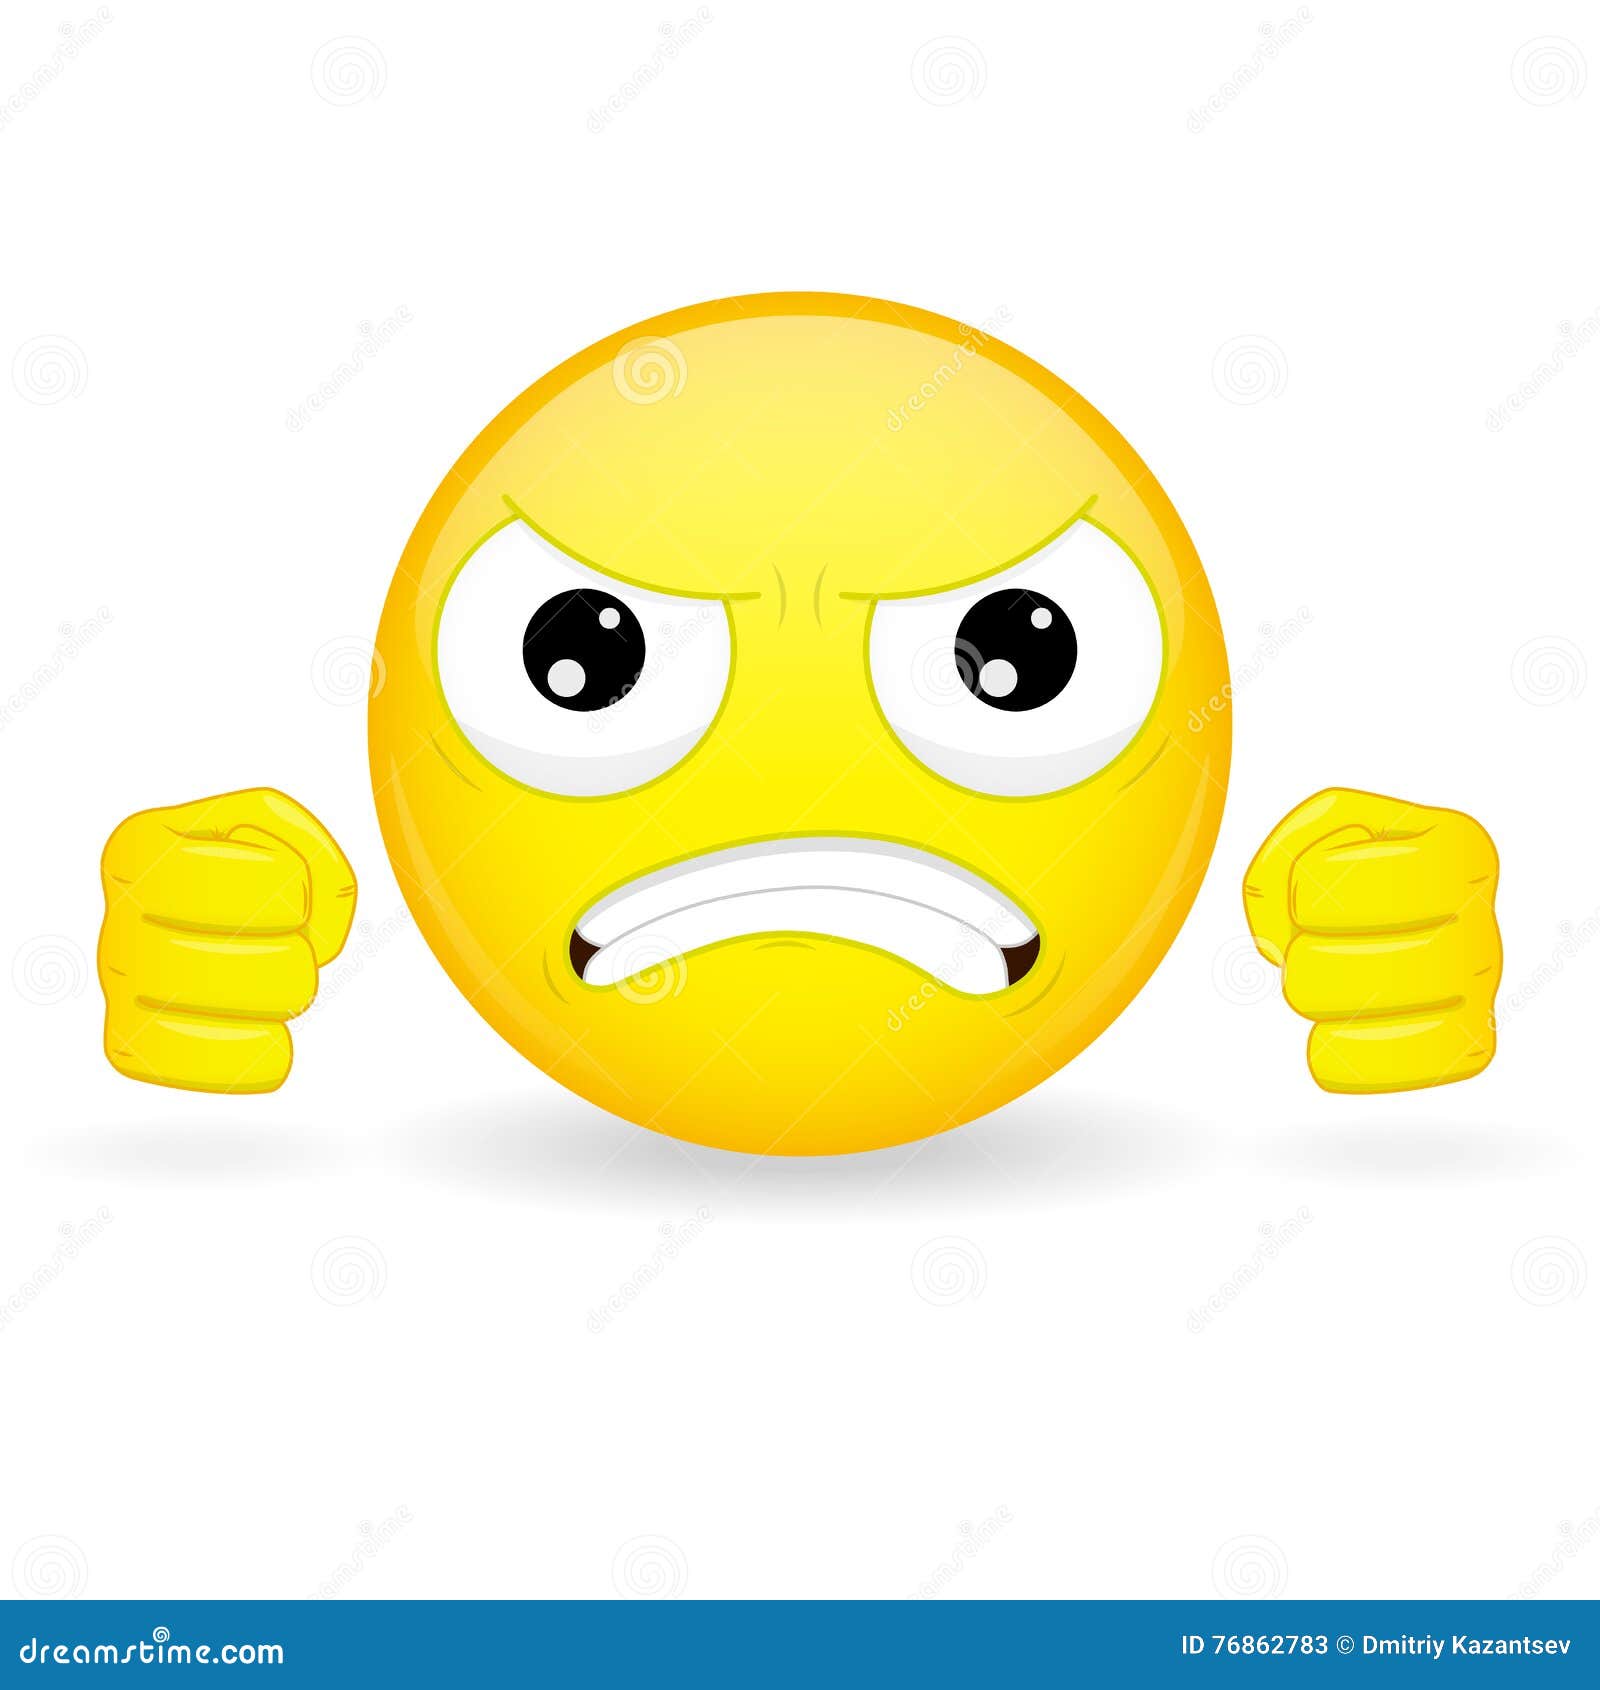 emoticon squeezed fists. angry emoticon. wicked emoticon. furious emoji. anger emotion.   smile icon.